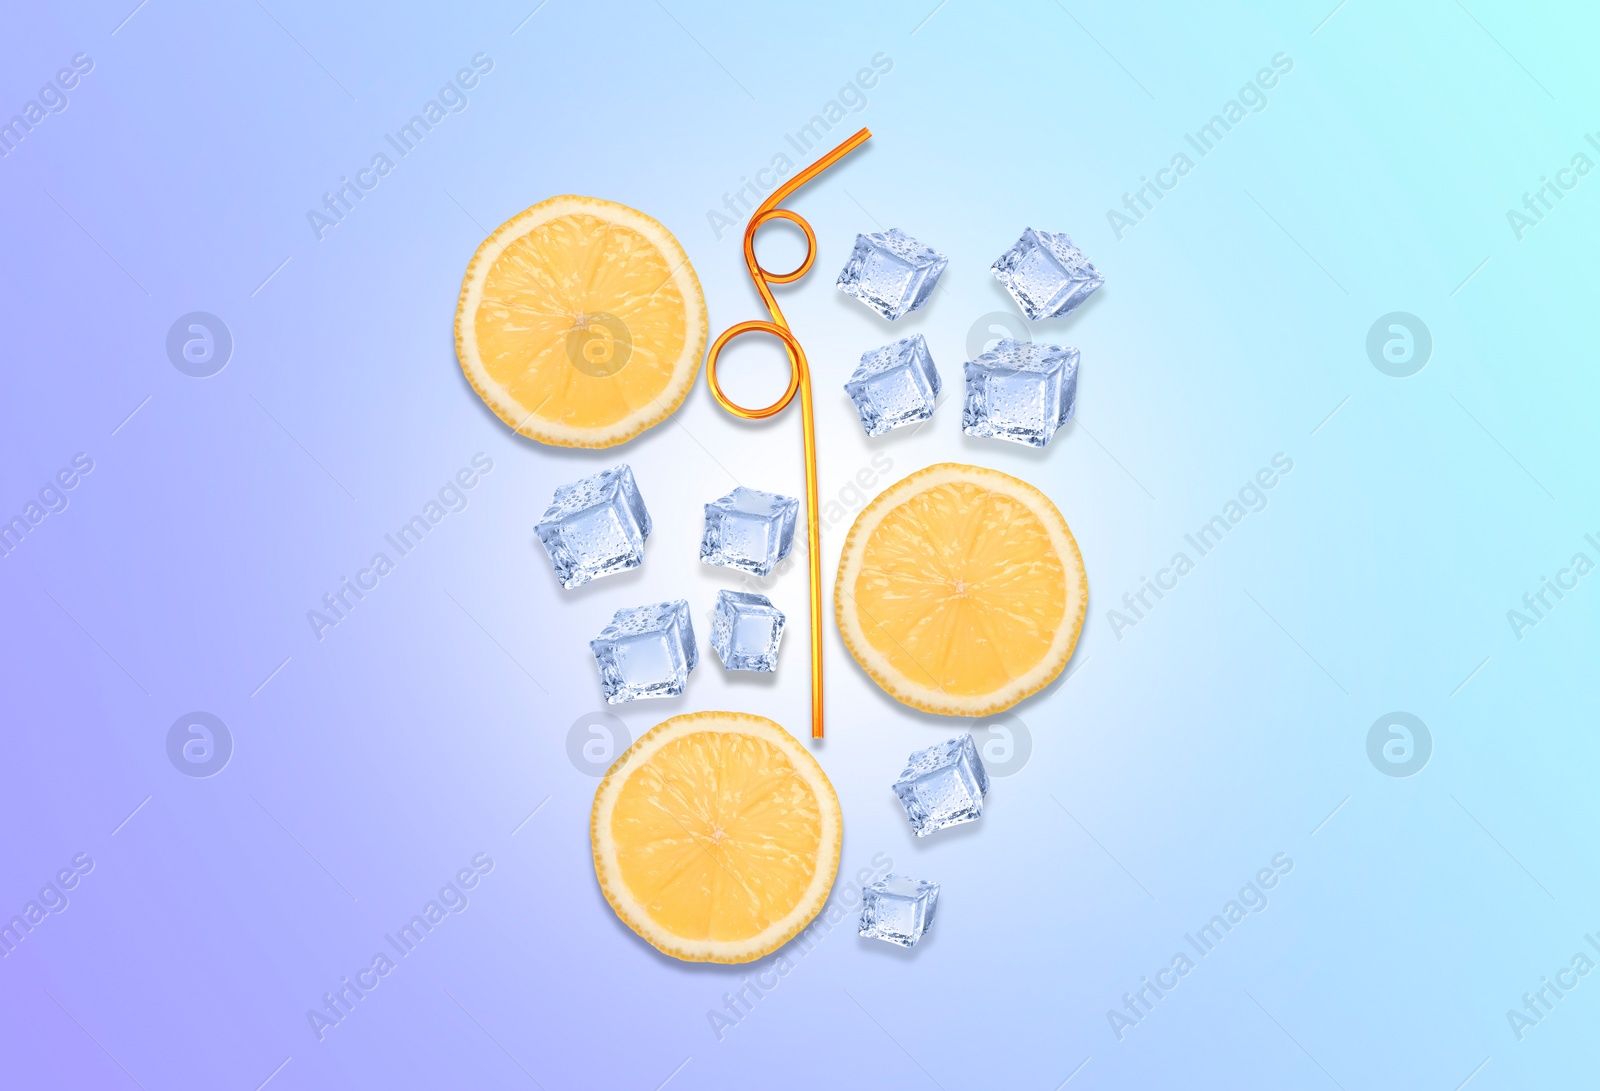 Image of Creative lemonade layout with lemon slices, ice cubes and straw on turquoise background, top view